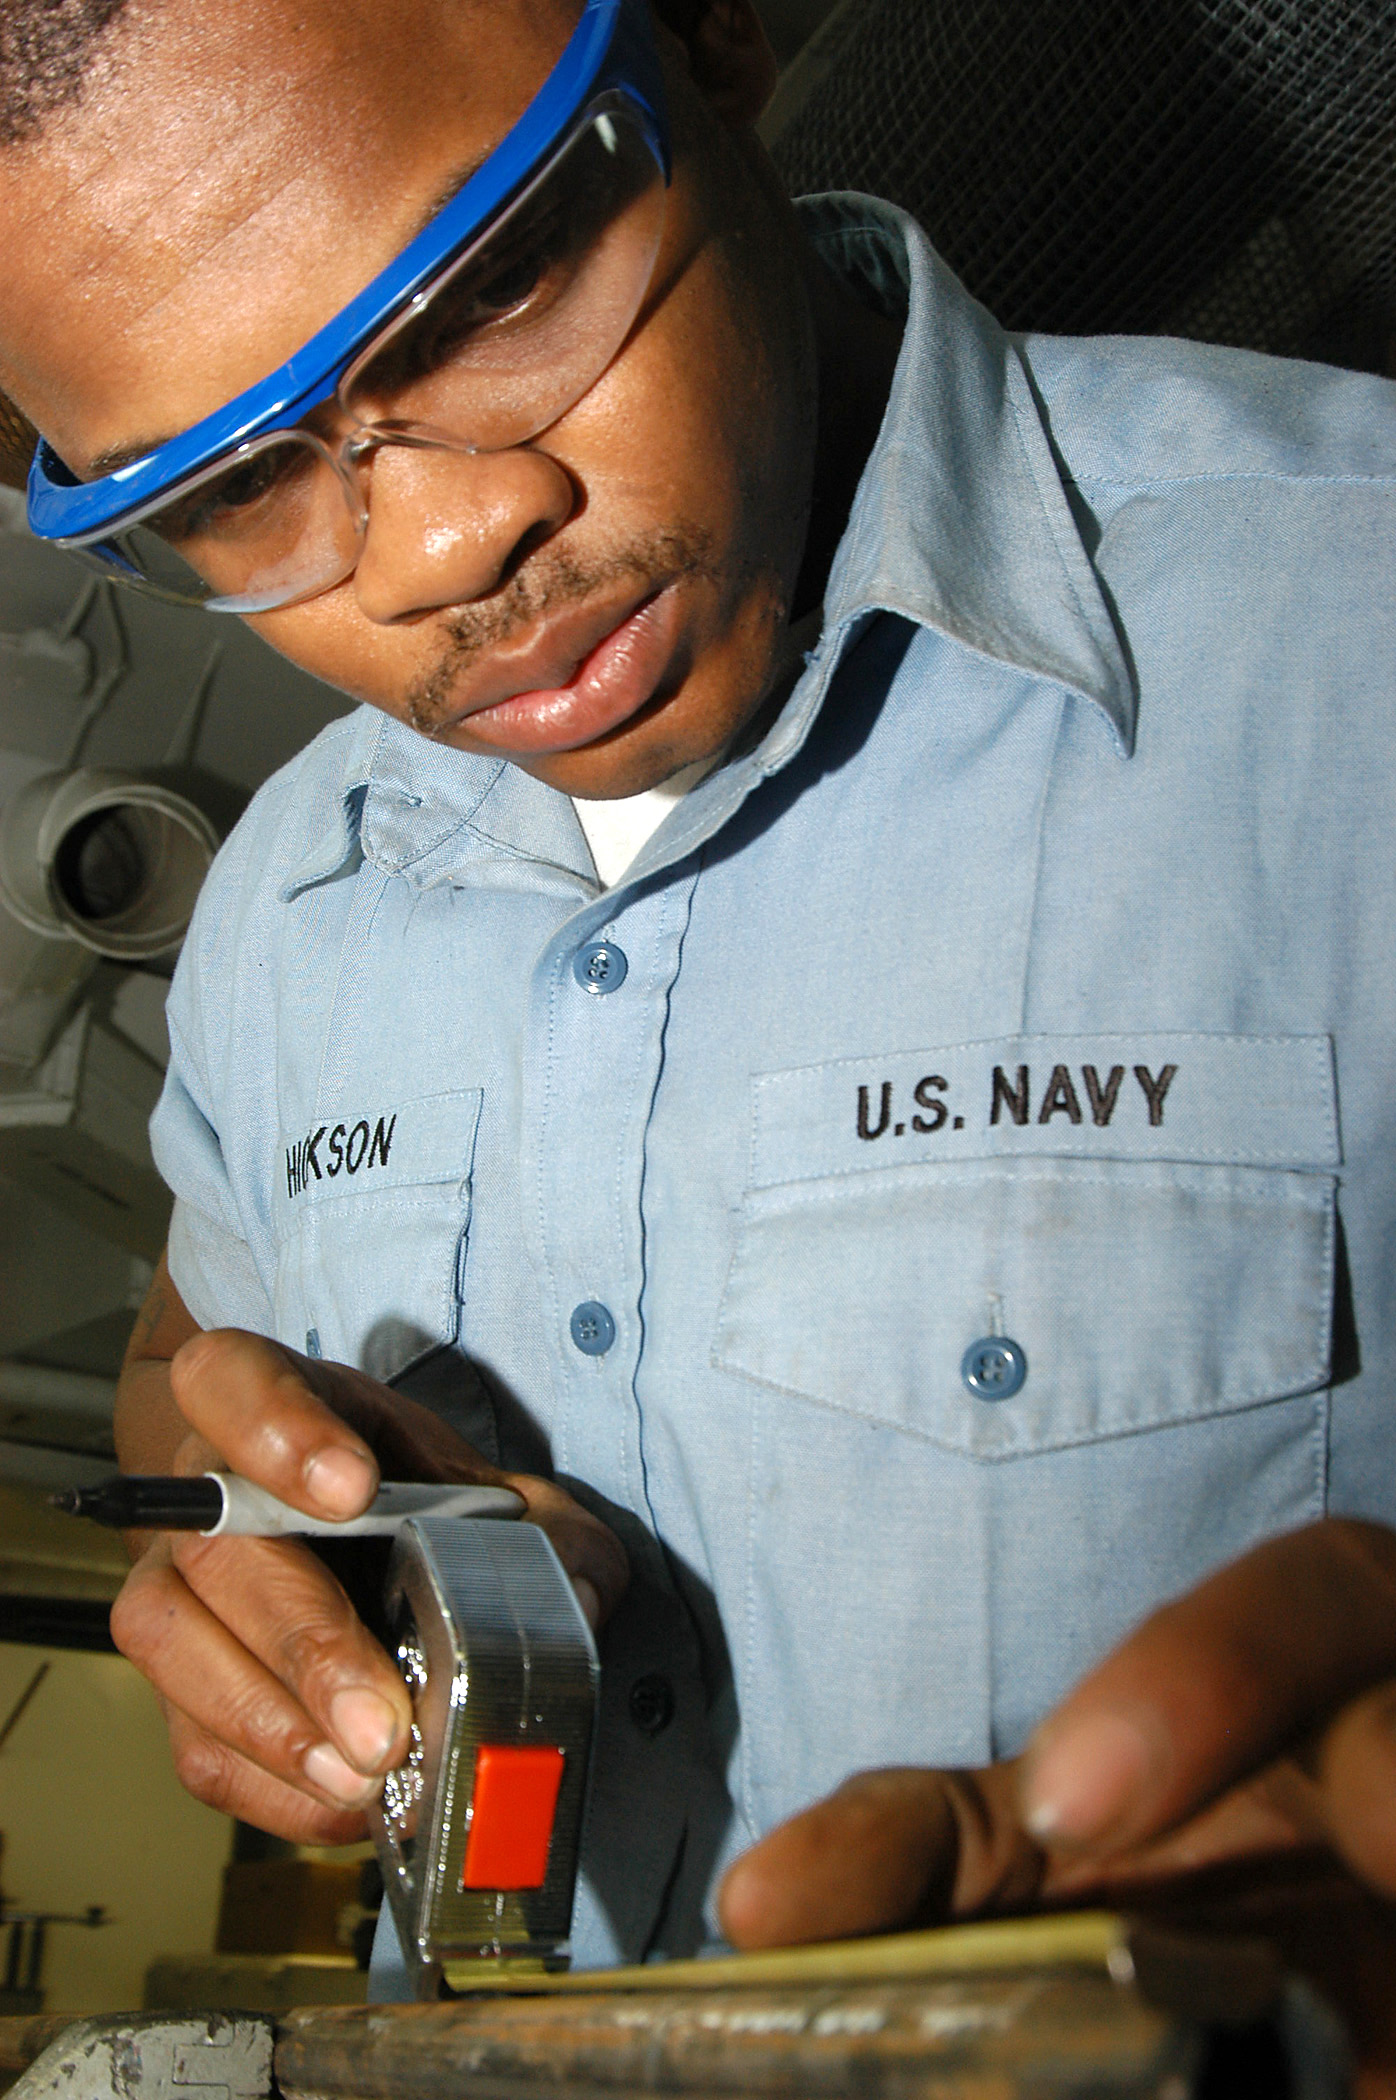 US Navy 031208-N-6278K-001 Hull Technician 3rd Class Thomas Hickson from Marion, S.C., measures a piece of metal in the machine shop aboard USS George Washington (CVN 73)